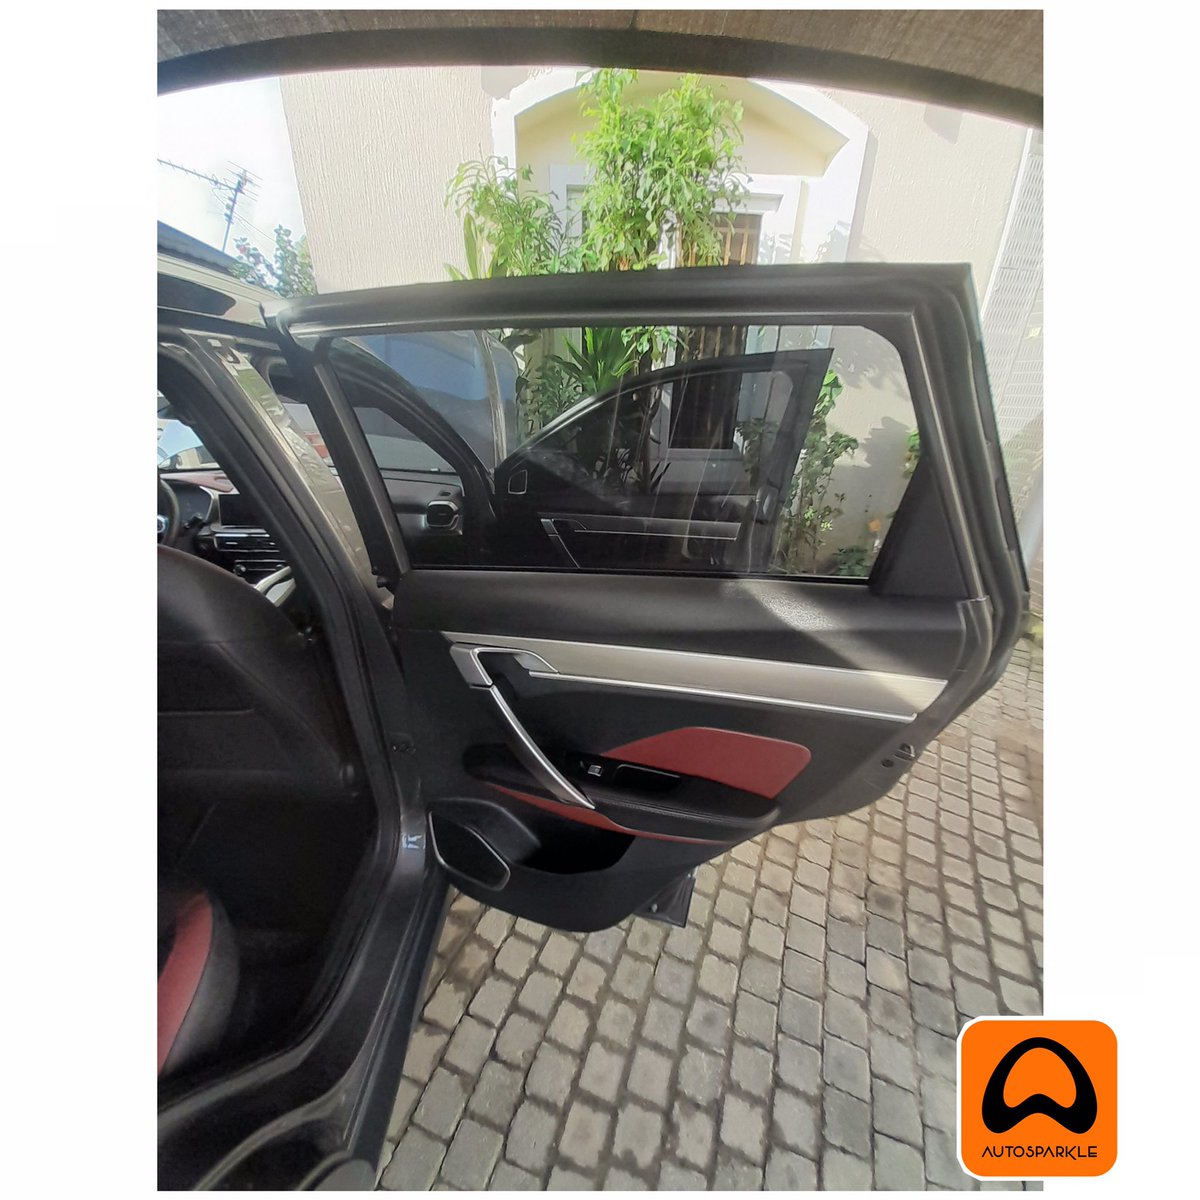 Both sides of the door are meticulously detailed and clean

#myautosparkle #riversstate #bella #mrbanks #another60m #messi #popsy